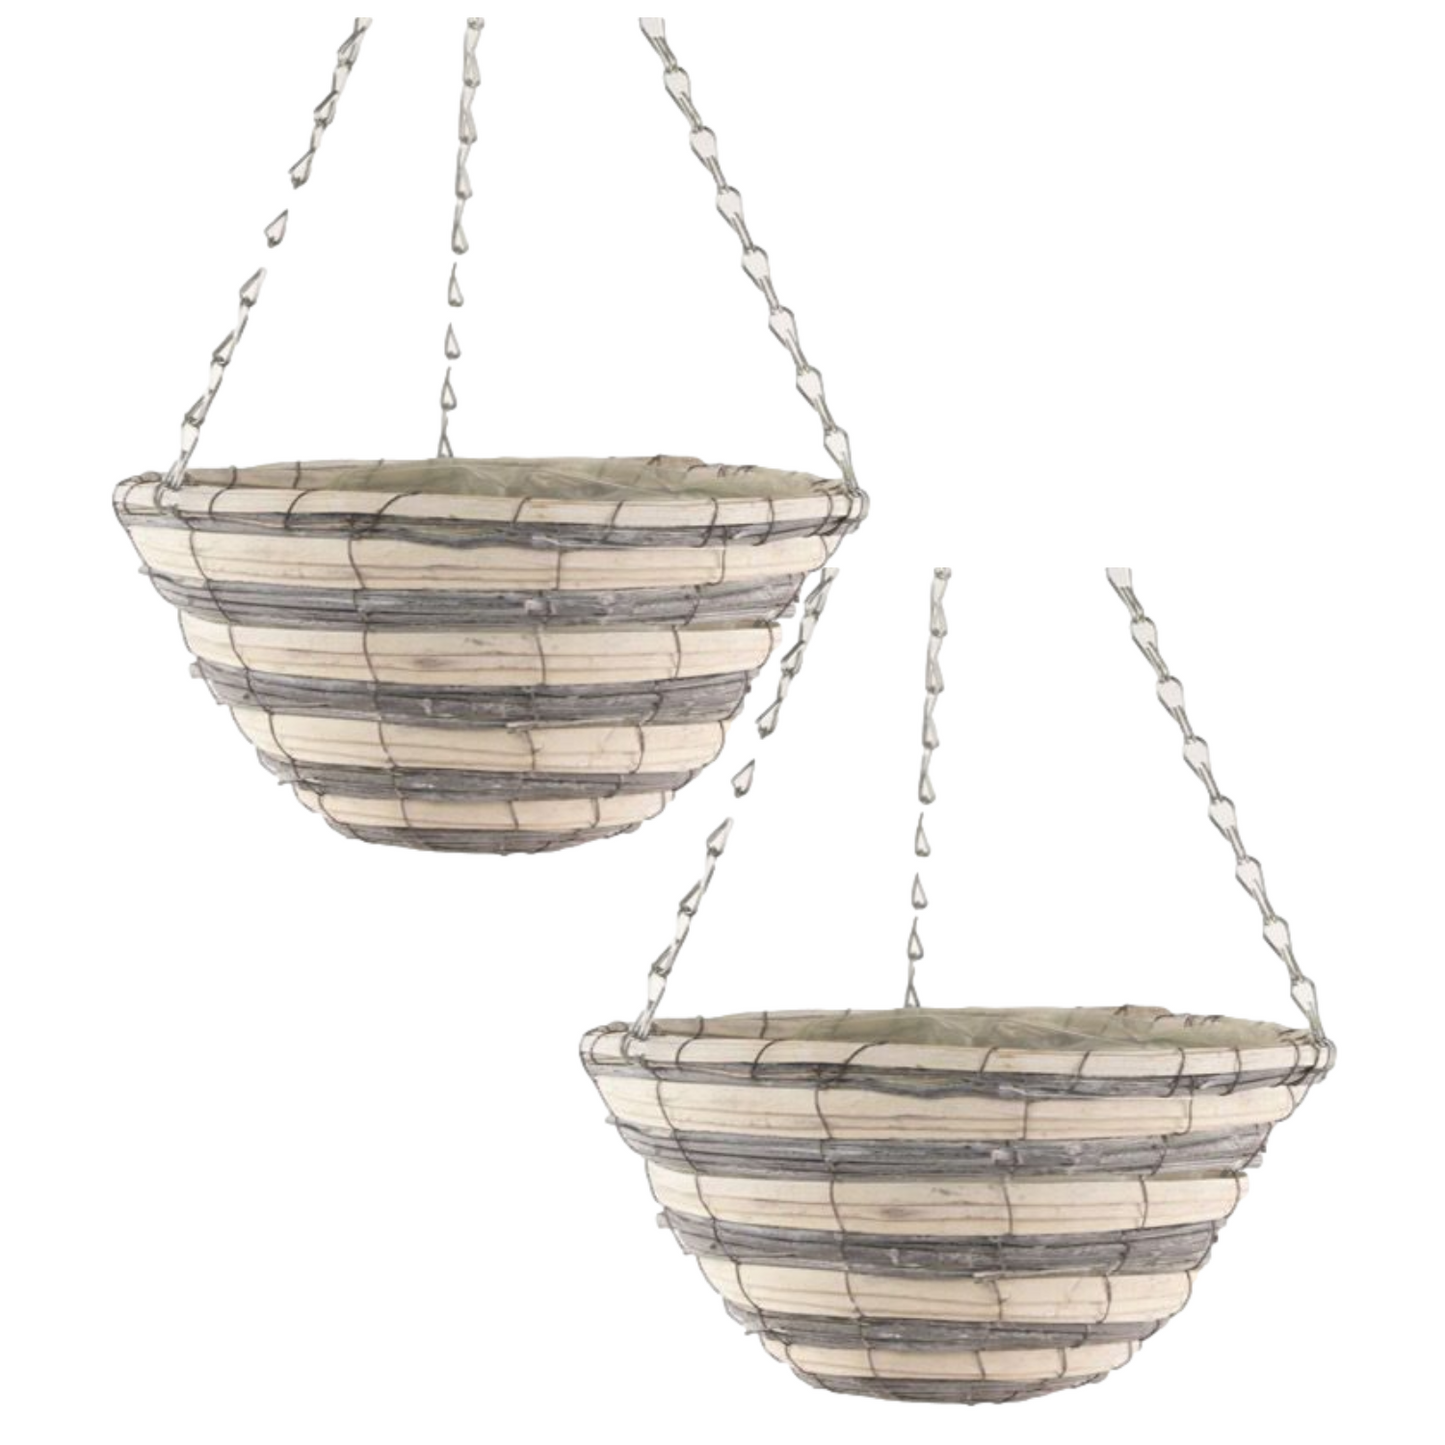 2X30cm 12Inch Natural Grey Cream Wicker Hanging Deco Basket Lined Willow Planter